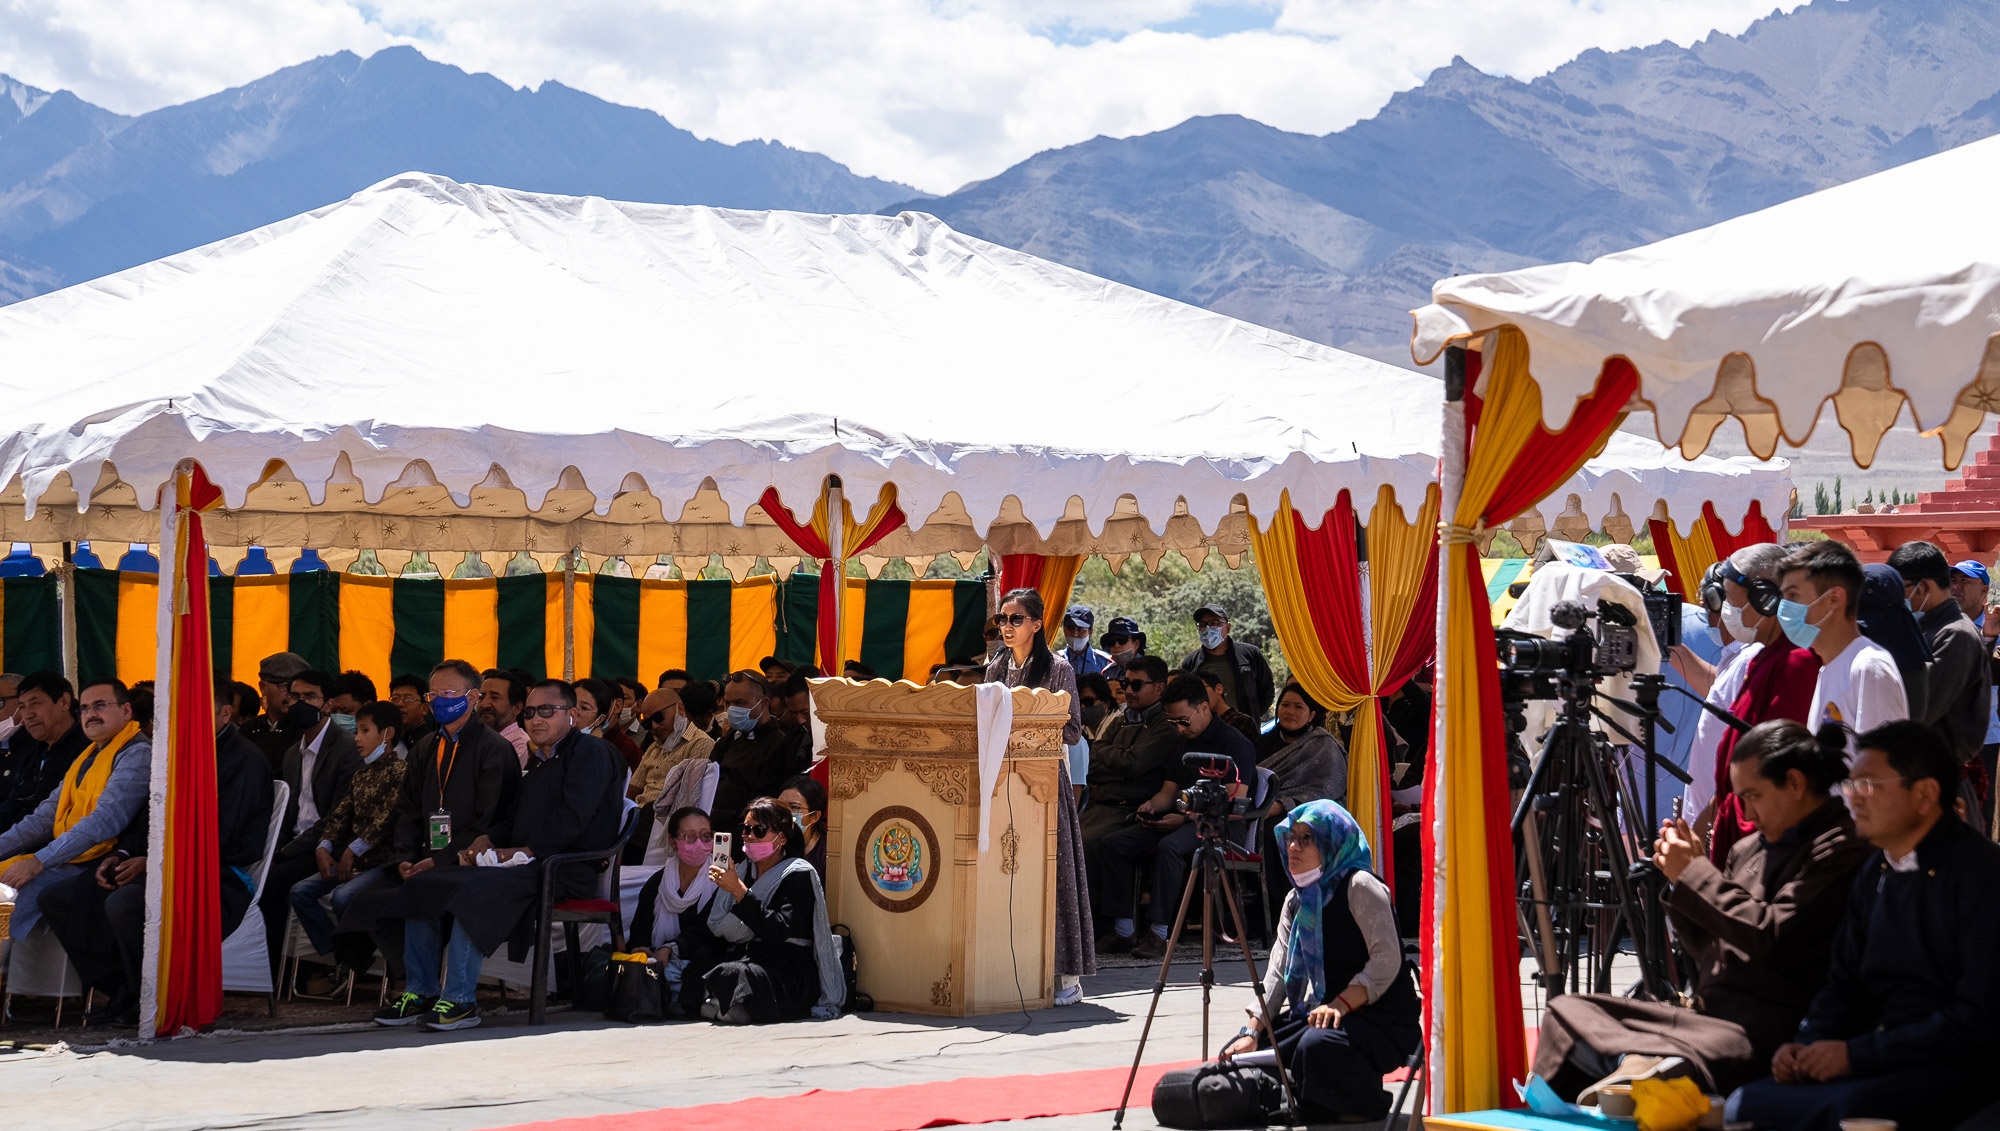 His Holiness the Dalai Lama being introduced to the audience gathered to hear him speak before a luncheon organized by the Ladakh Autonomous Hill Development Council (LAHDC) at Sindhu Ghat in Leh, Ladakh, UT, India on August 23, 2022. Photo by Tenzin Choejor